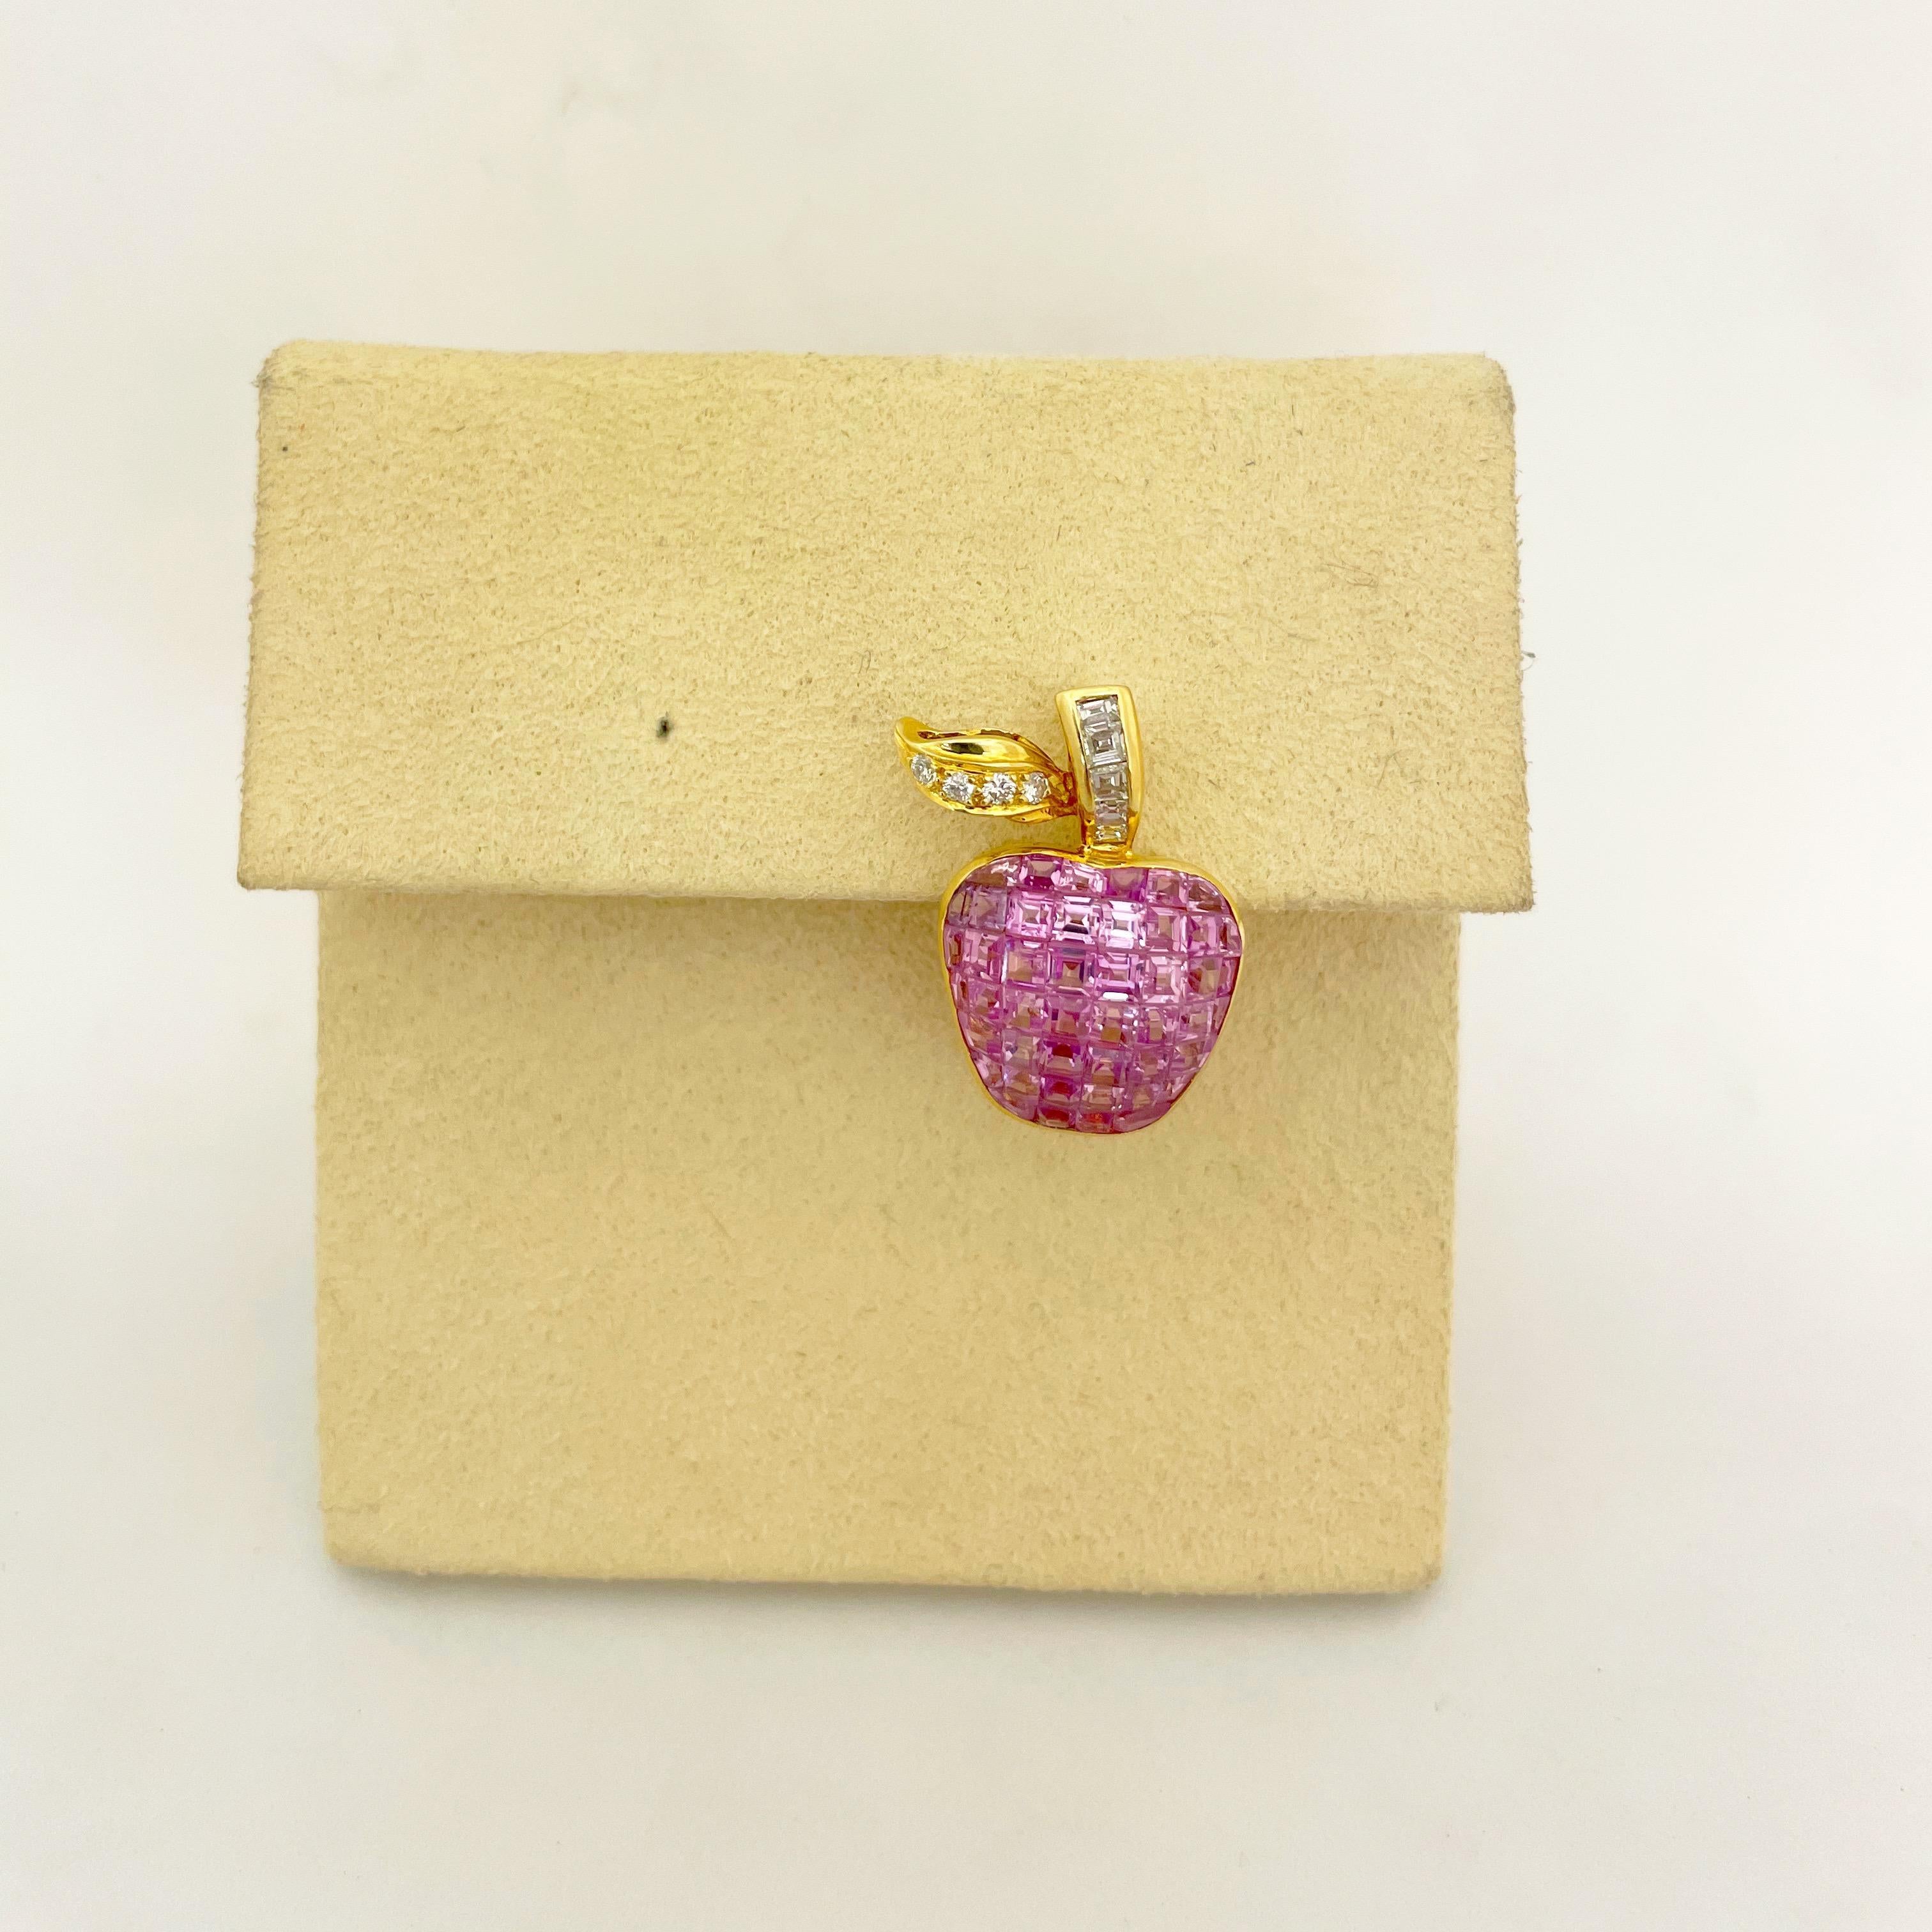 Cellini 18 Karat Gold, 7.55 Carat Invisibly Set Pink Sapphire Apple Brooch For Sale 2